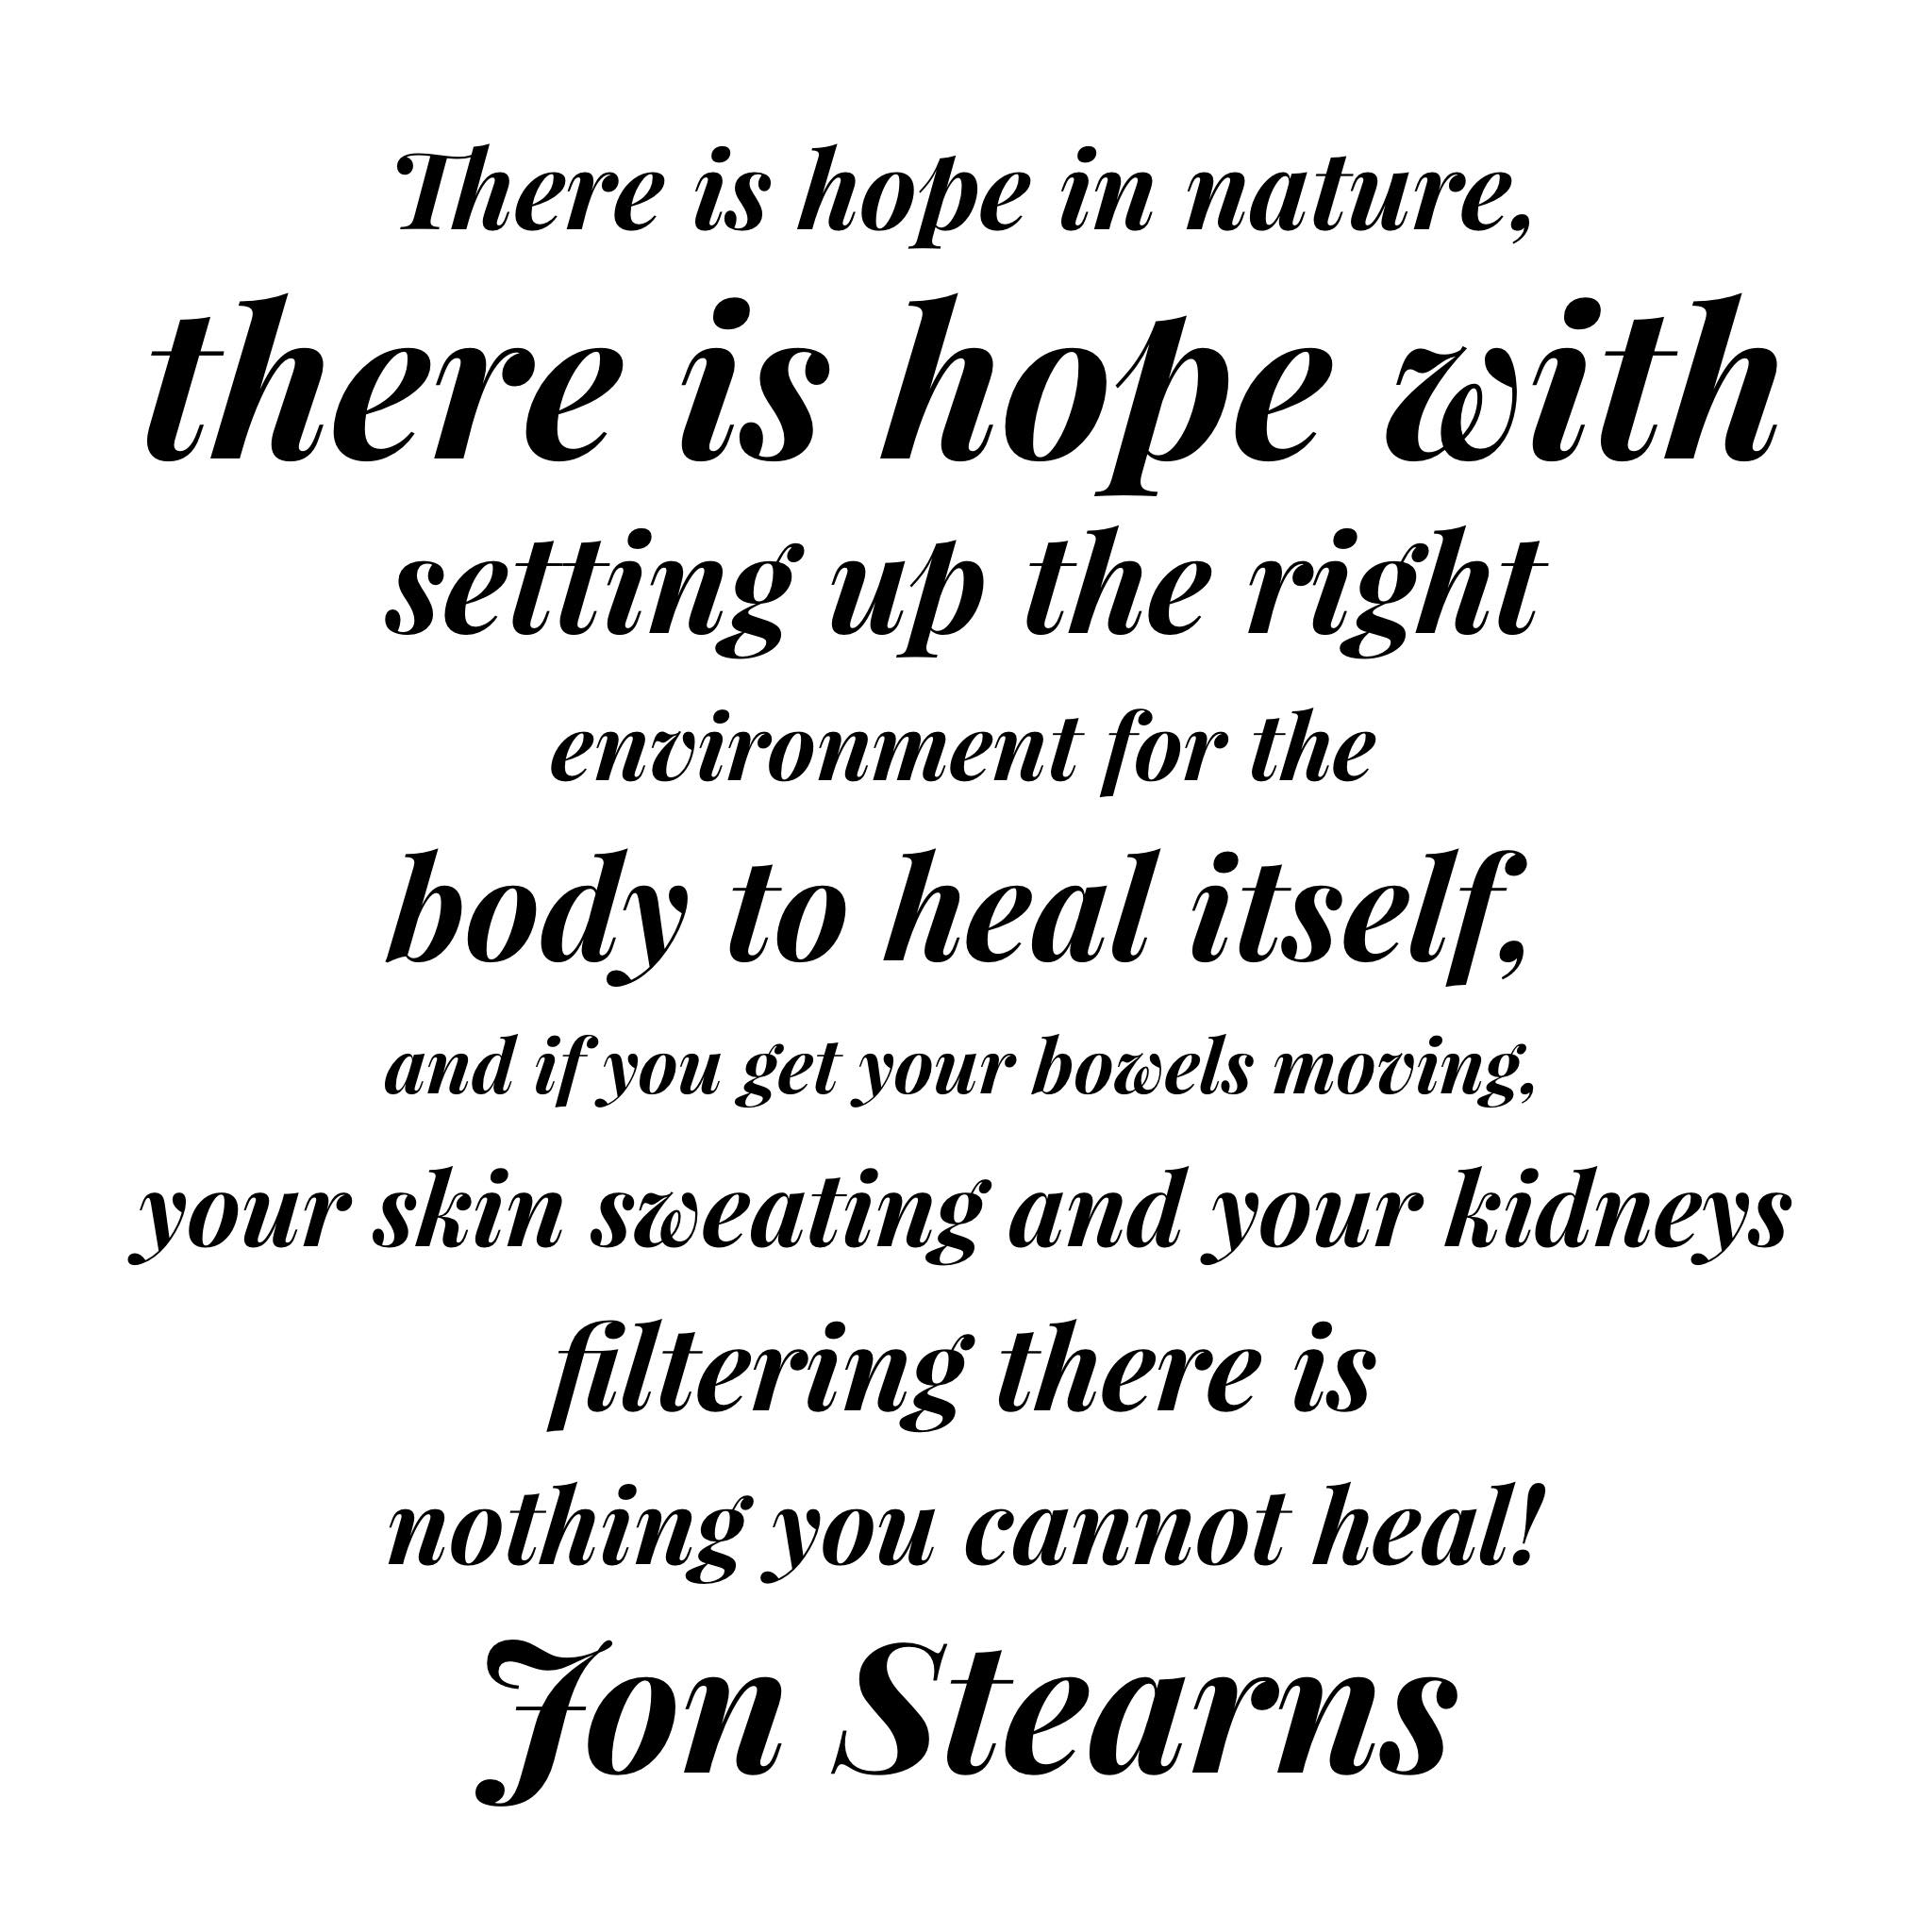 No hope for healing outside of nature